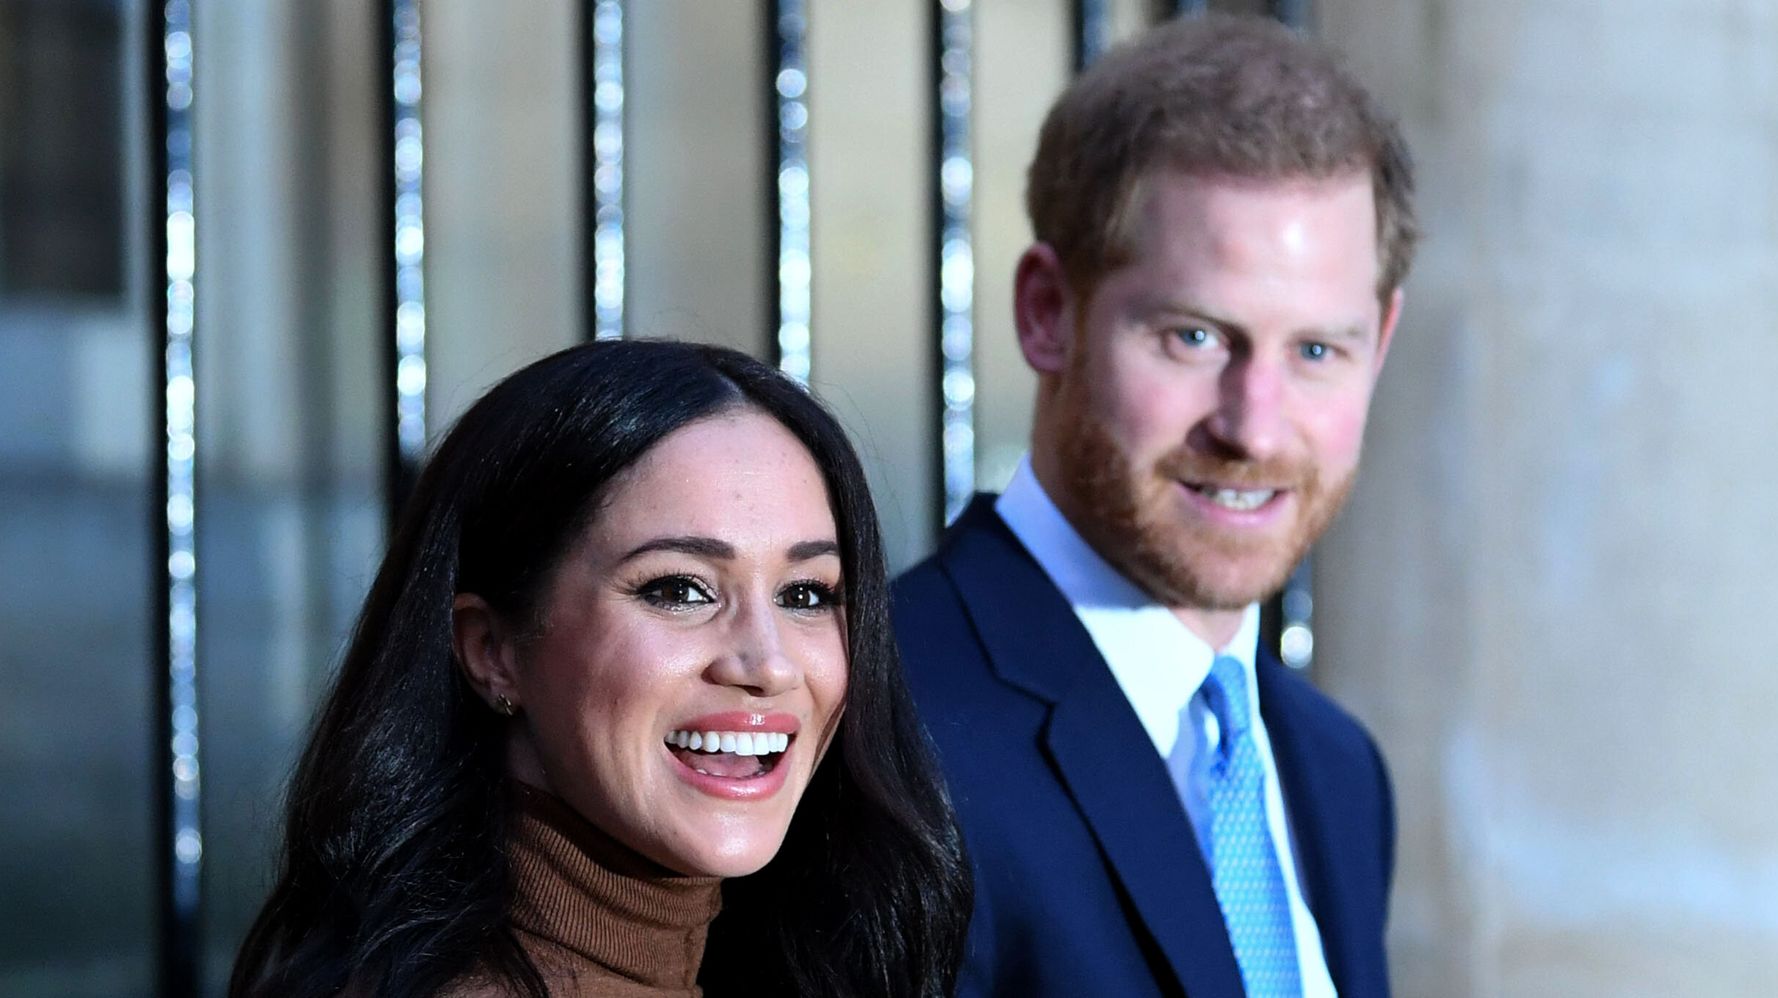 Prince Harry Gets Apology After Group's 'Widely Publicized Untrue Claims'